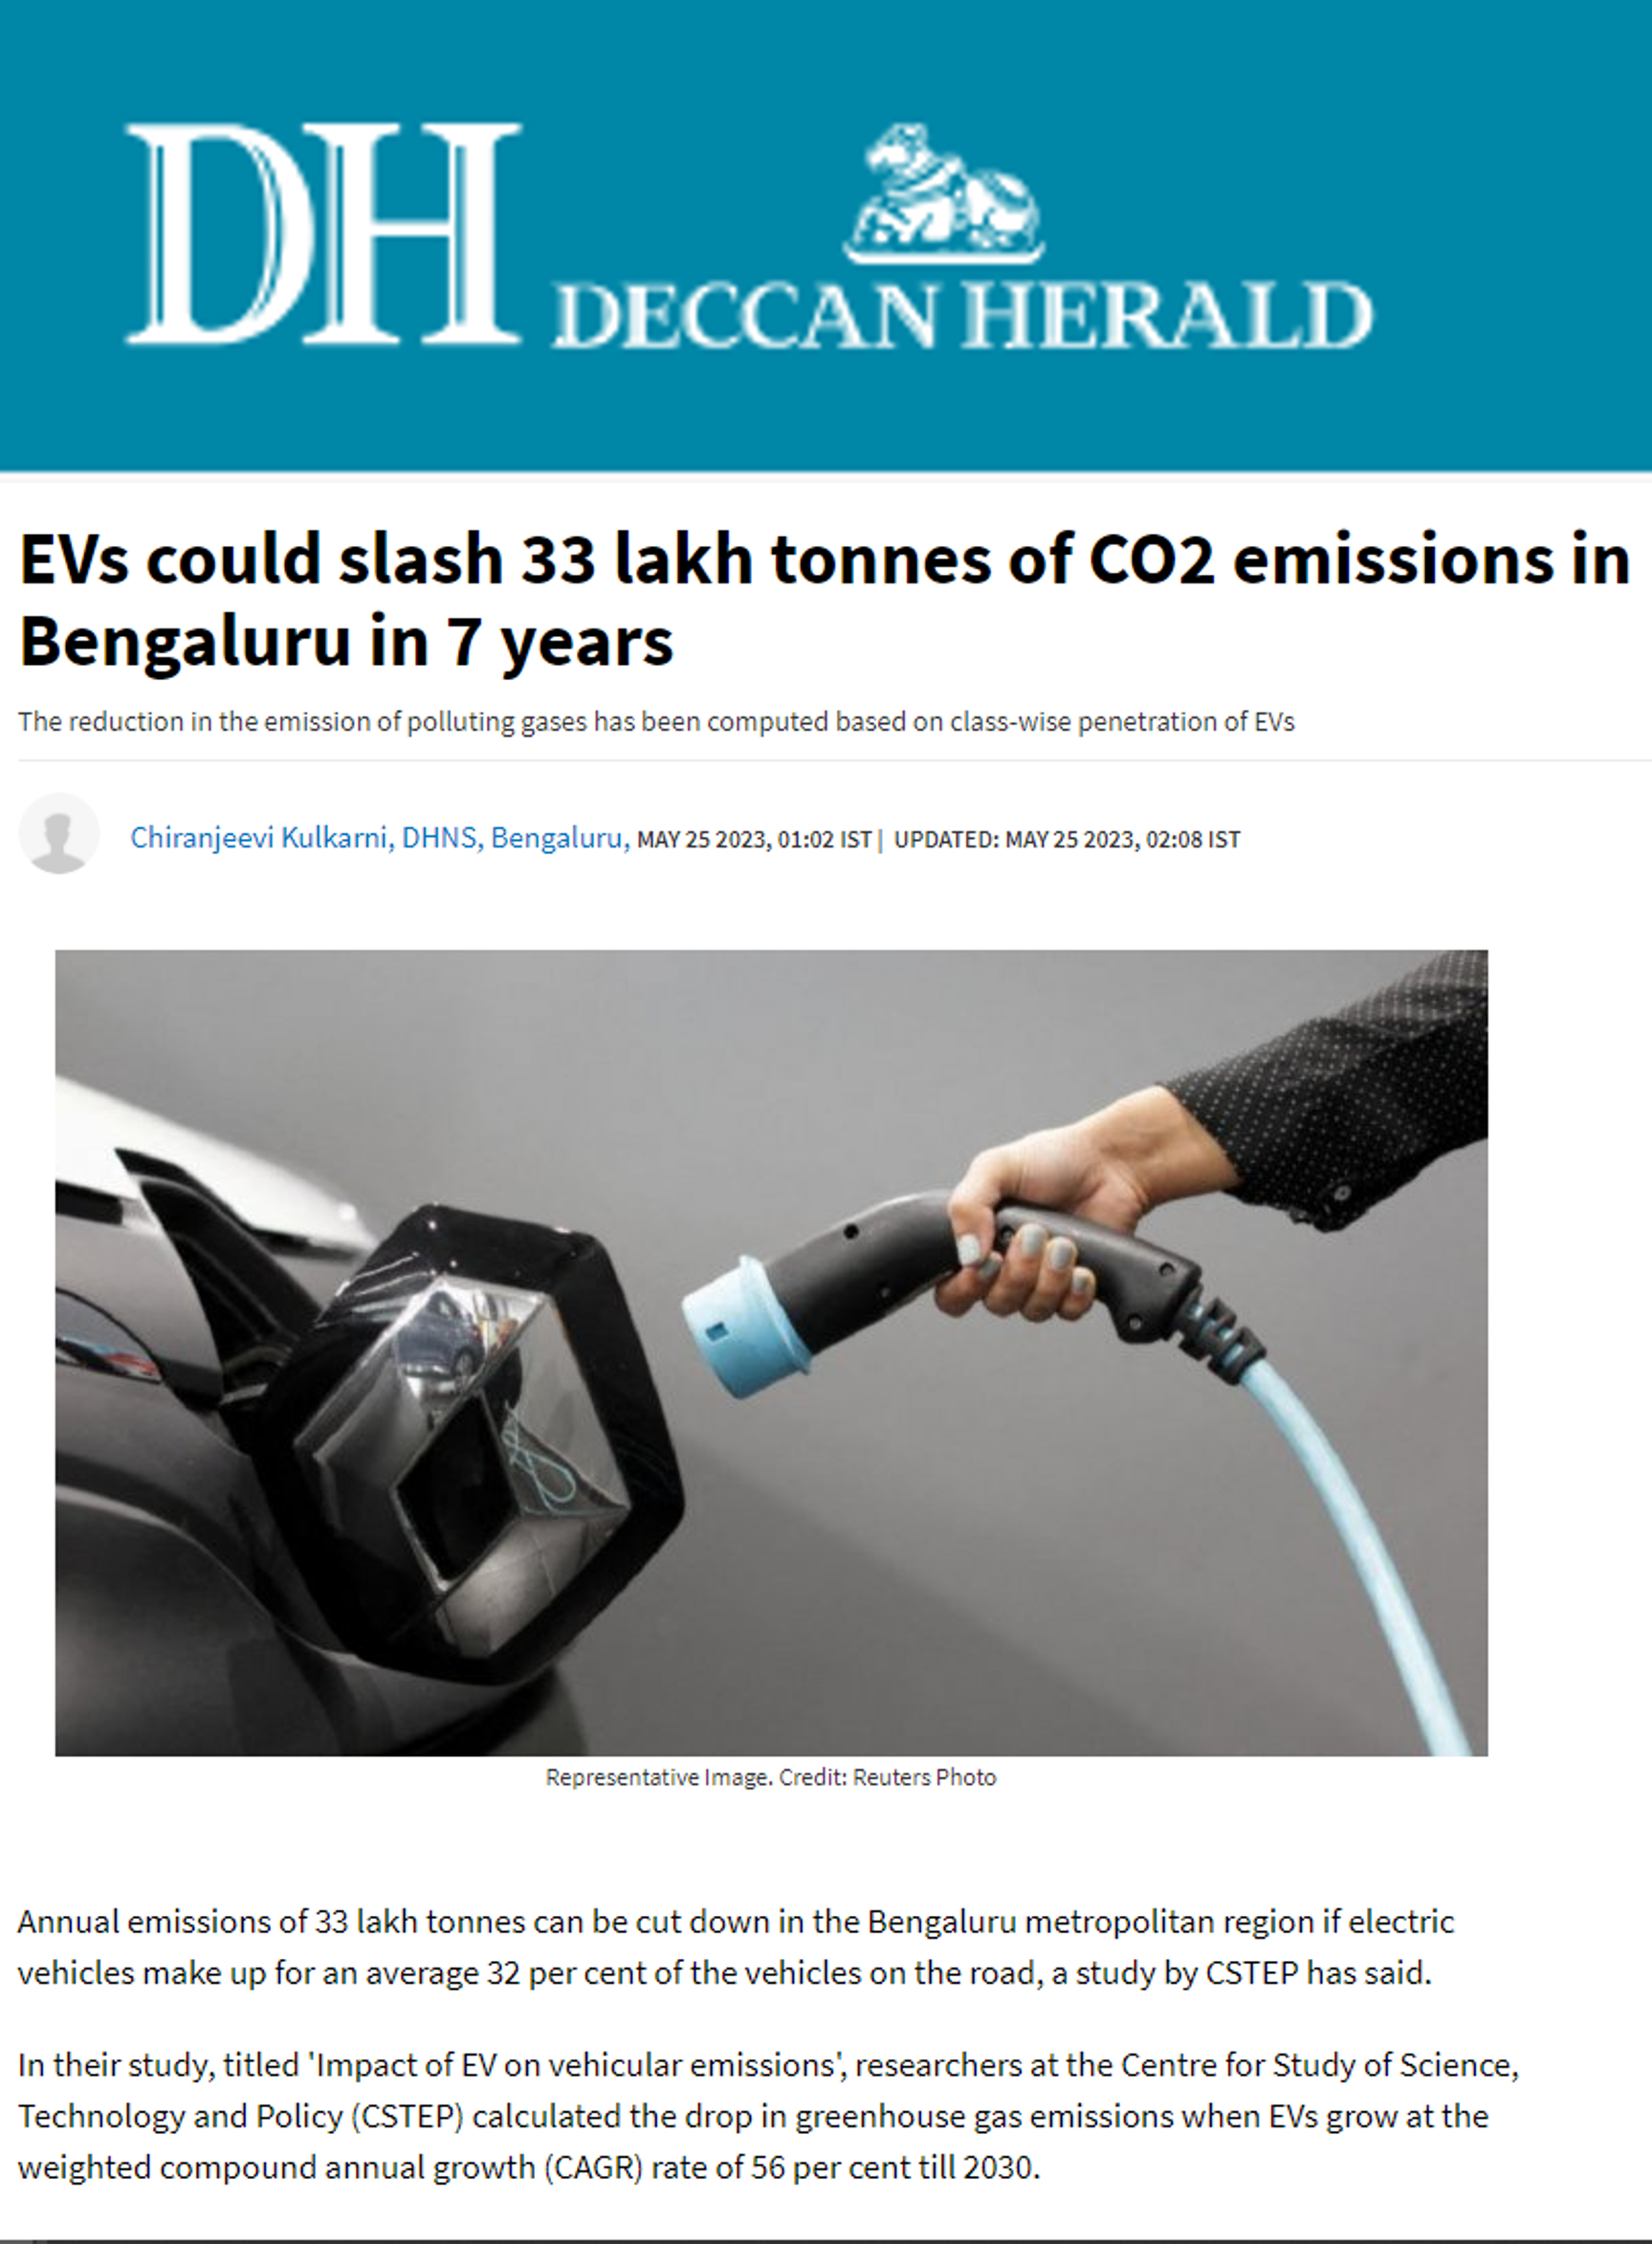 CSTEP’s study on the impact of electric vehicles on vehicular pollution covered by Deccan Herald